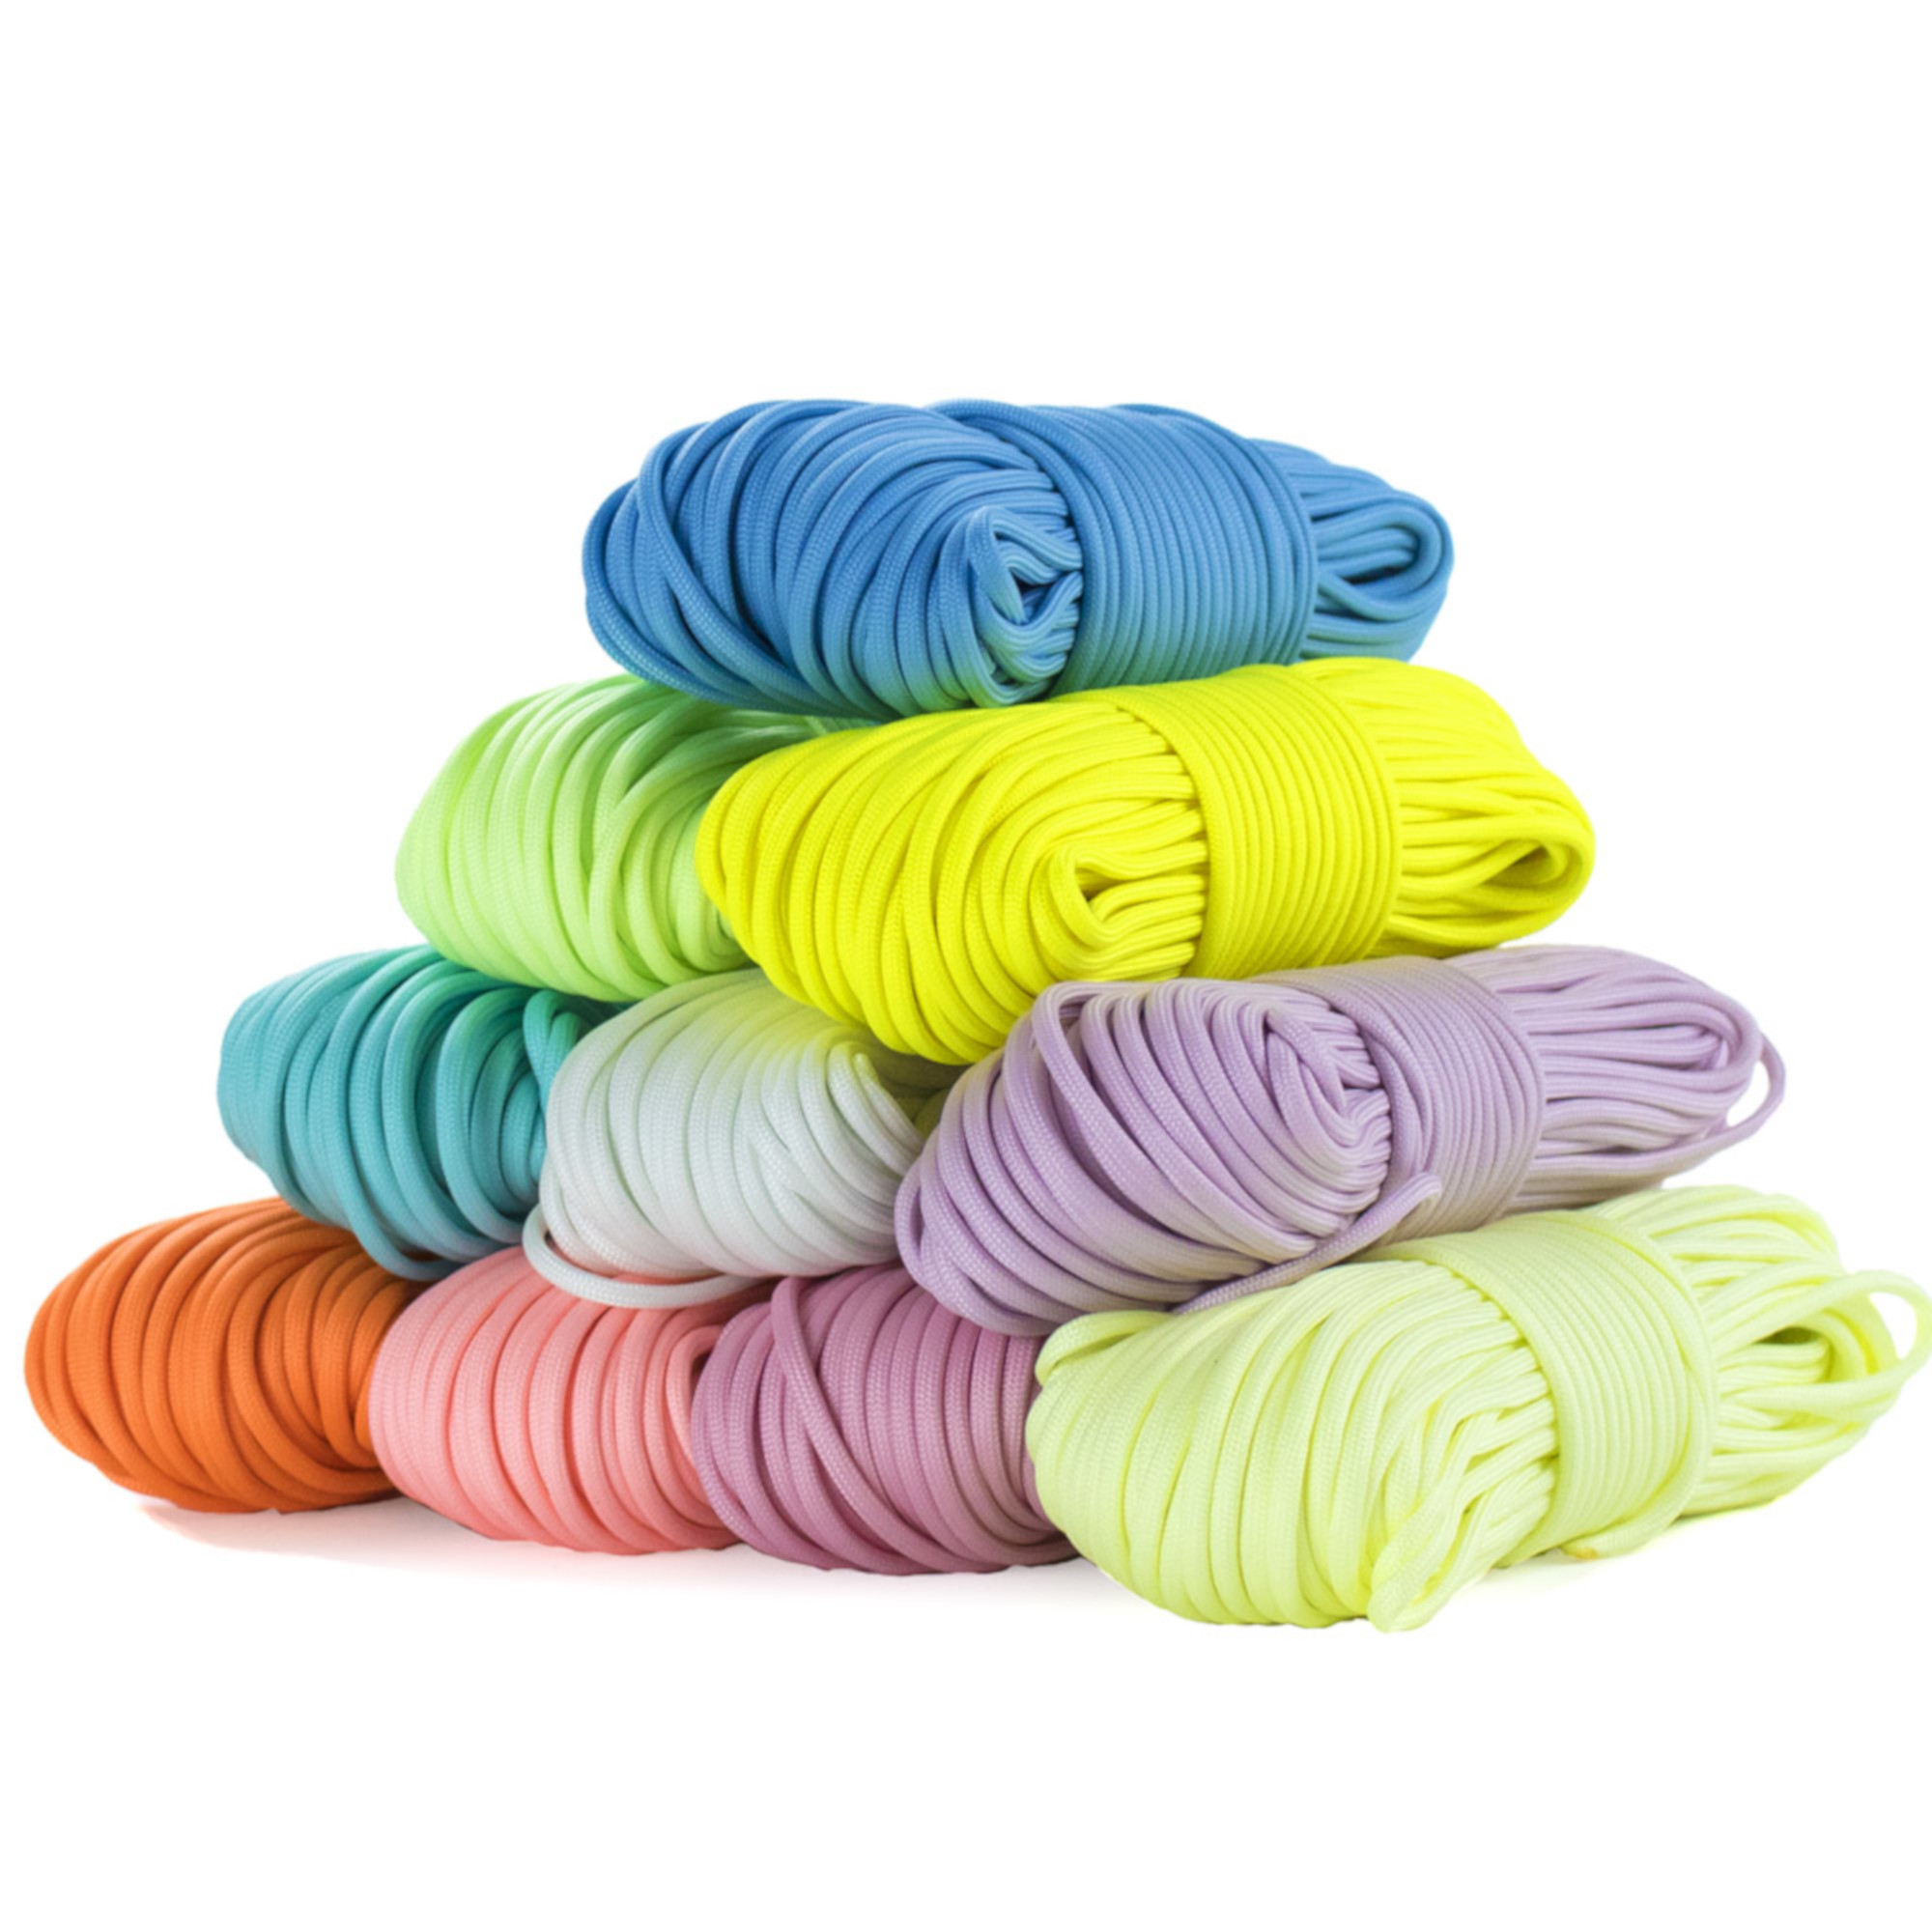 West Coast Paracord Luminous Type III Strand Nylon Glow in the Dark 550  Paracord (Parachute Cord) Rope 10', 25', 50', 100' Hanks  1000' Spools  Multiple Colors